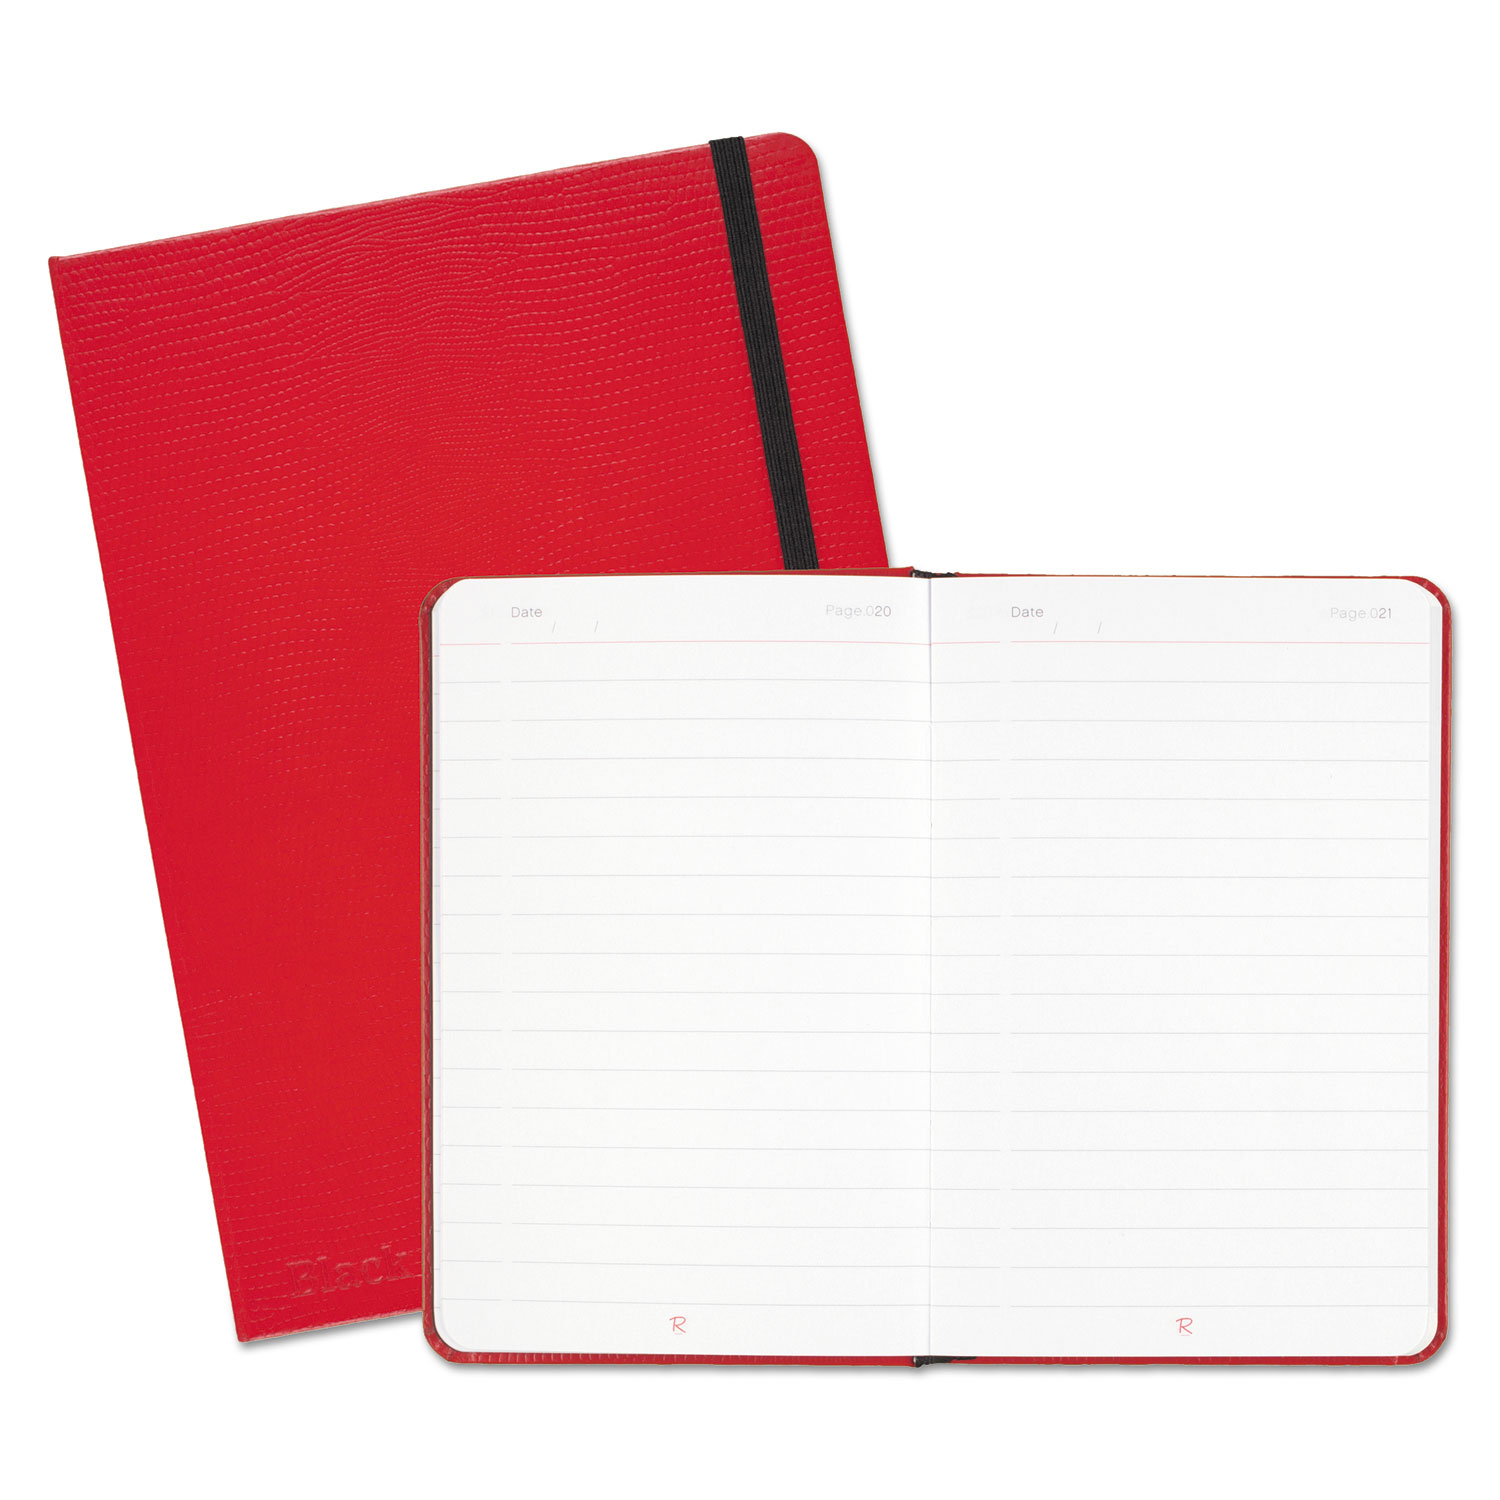  Black n' Red 400065003 Red Casebound Hardcover Notebook, Wide/Legal Rule, Red Cover, 8.25 x 5.75, 71 Sheets (JDK400065003) 